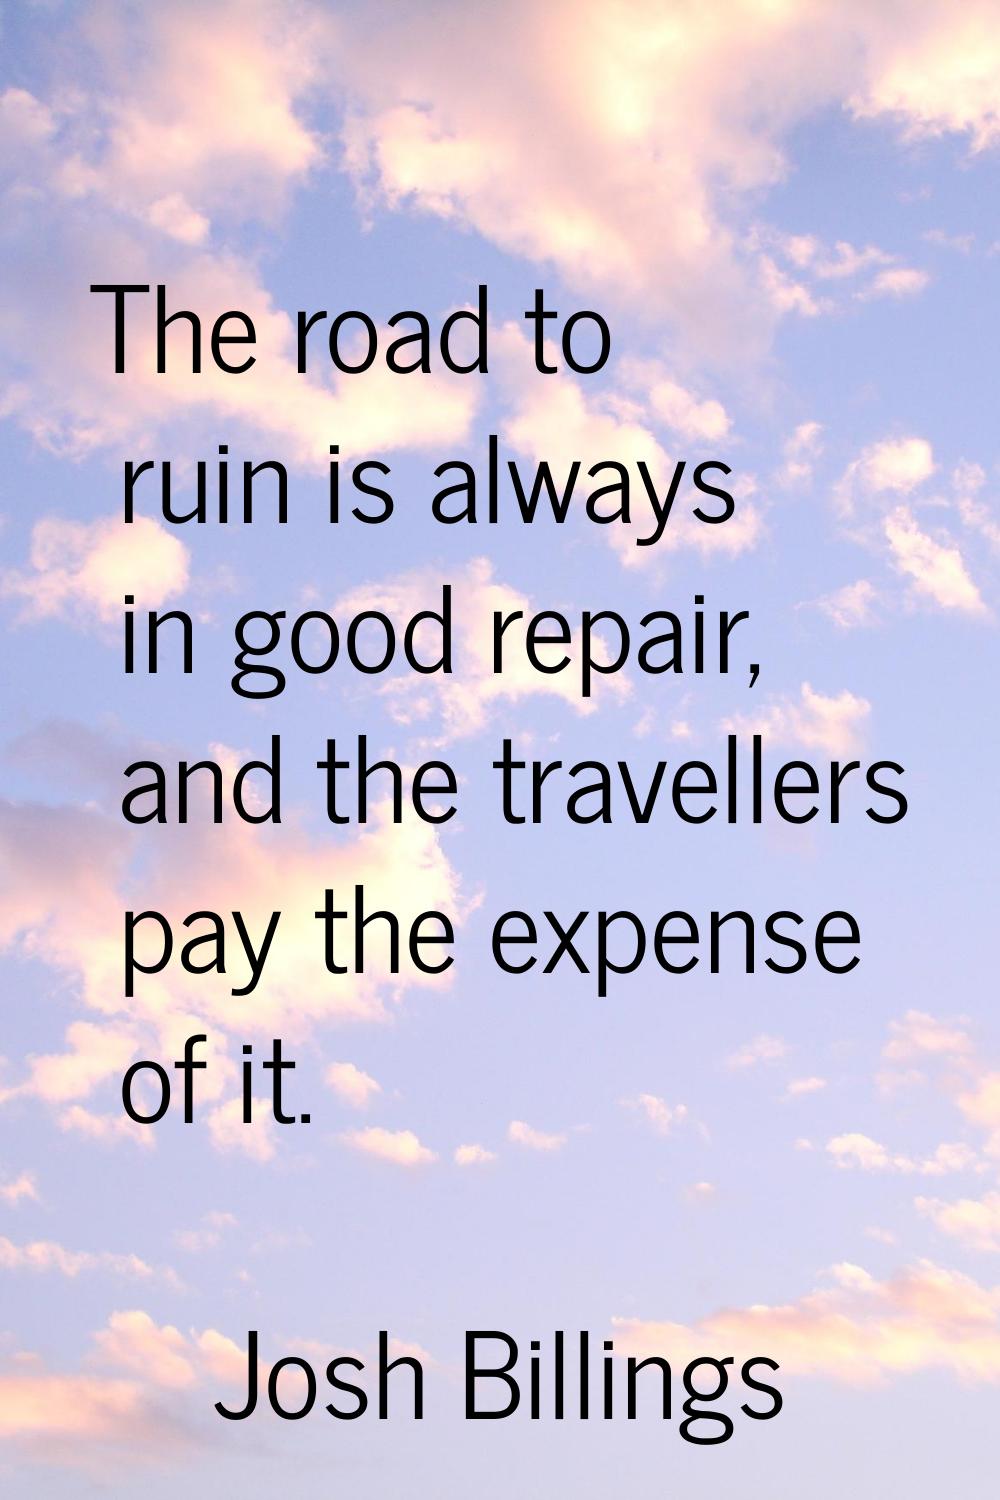 The road to ruin is always in good repair, and the travellers pay the expense of it.